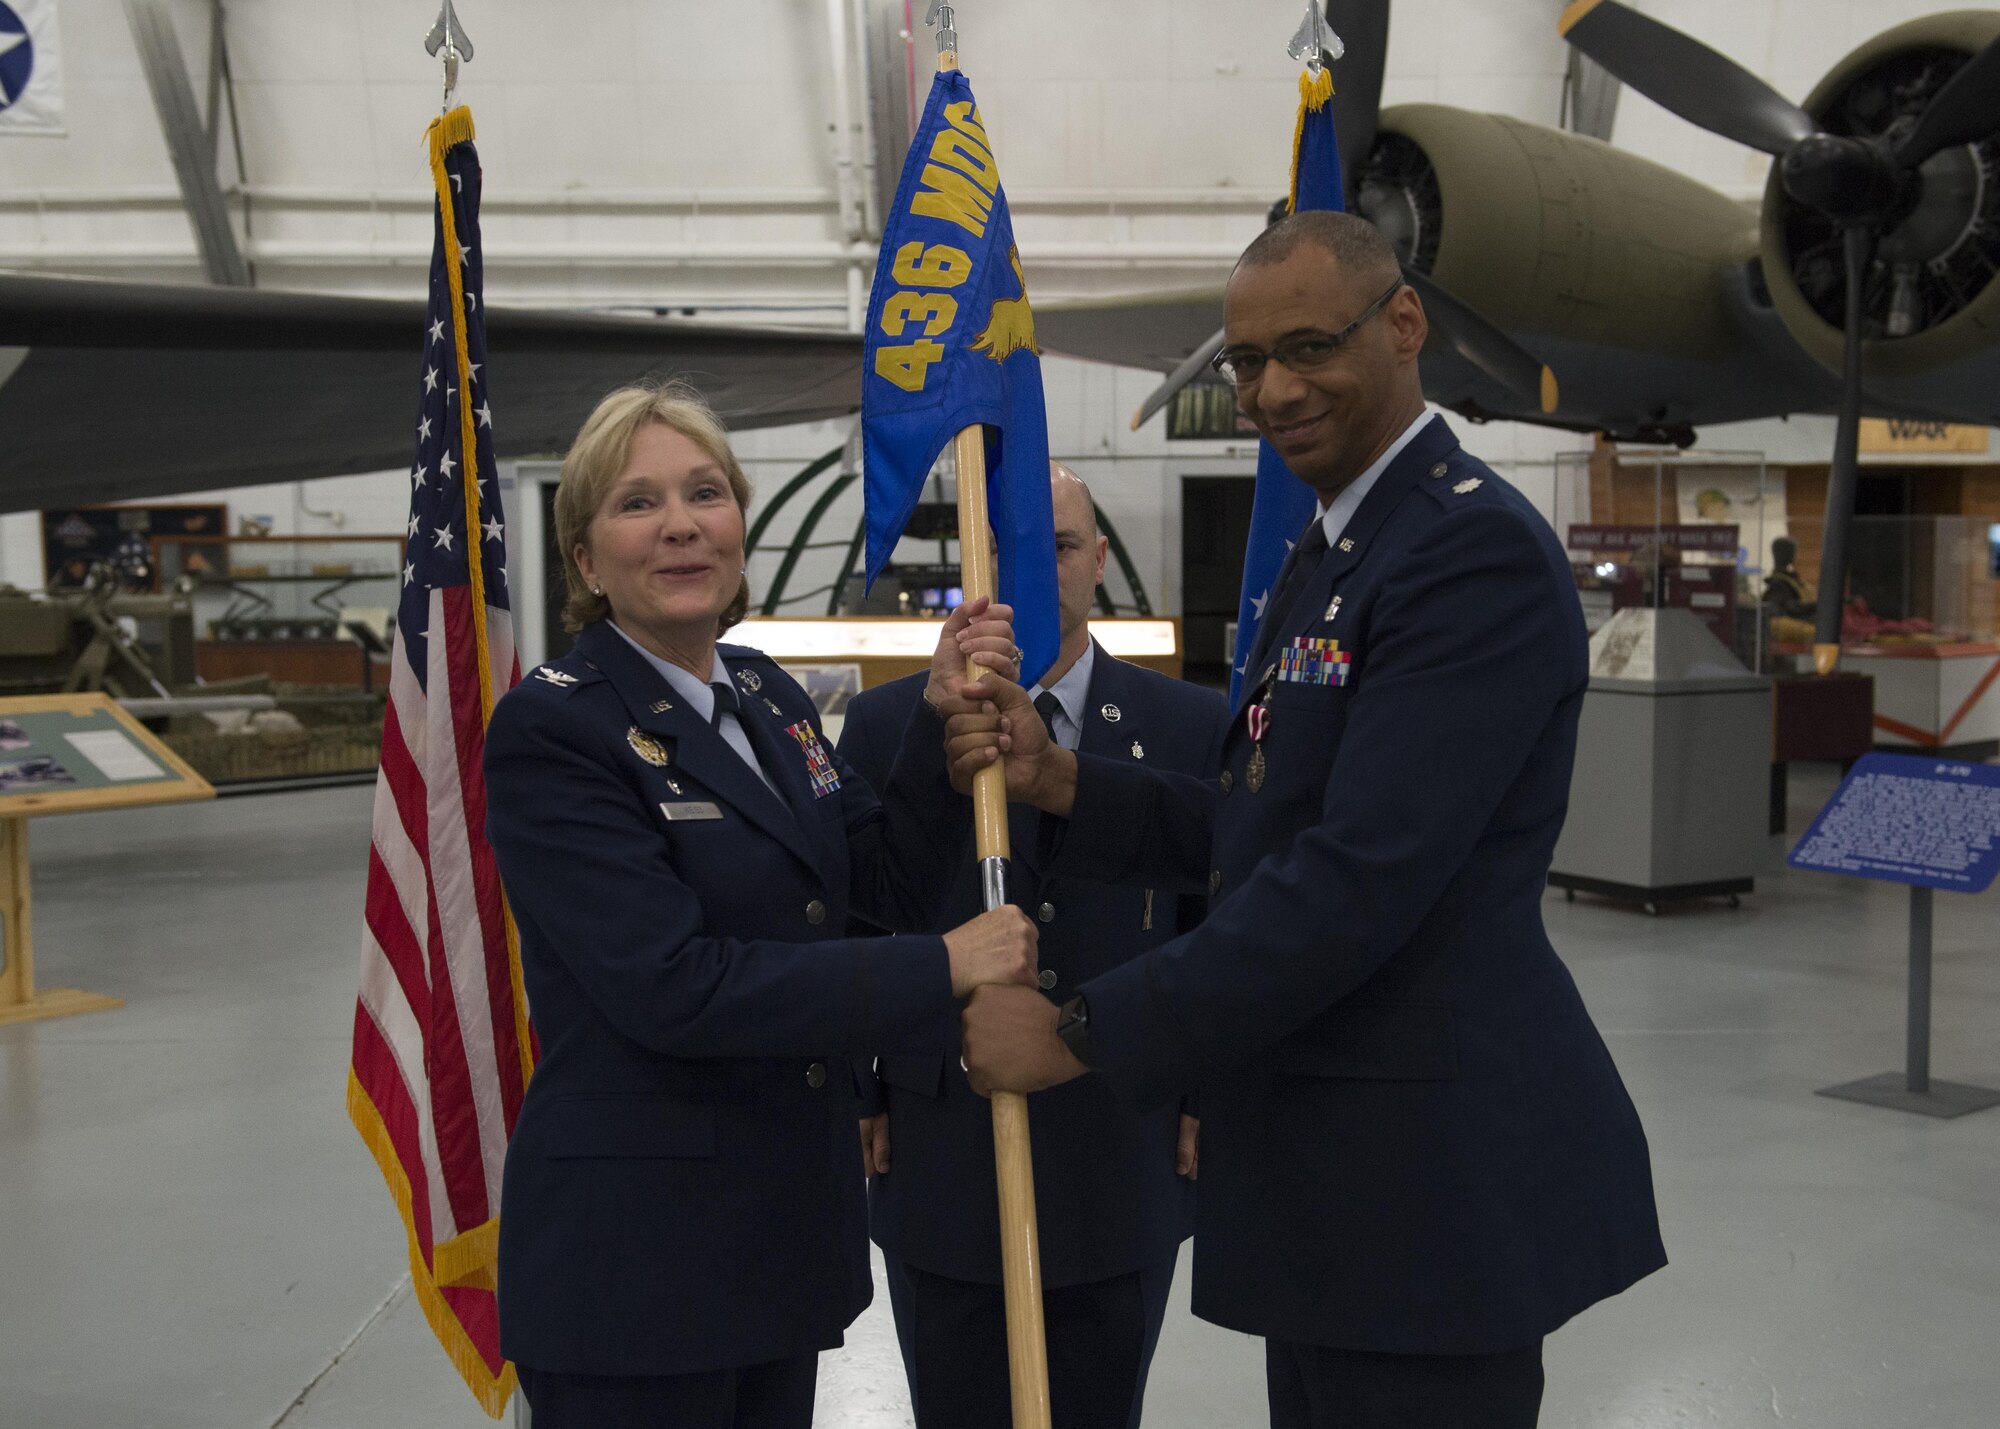 Lt. Col. Eric Baugh, 436th Dental Squadron out-going commander, relinquishes command by handing off his squadron’s guidon to Col. Kathryn Weiss, 436th Medical Group commander, during the 436th Dental Squadron Inactivation Ceremony on June 28, 2016, at the Air Mobility Command Museum on Dover Air Force Base, Del. The 436th DS will now be designated as the 436th Dental Flight, subordinate to the 436th Aerospace Medicine Squadron. (U.S. Air Force photo/Senior Airman Zachary Cacicia)